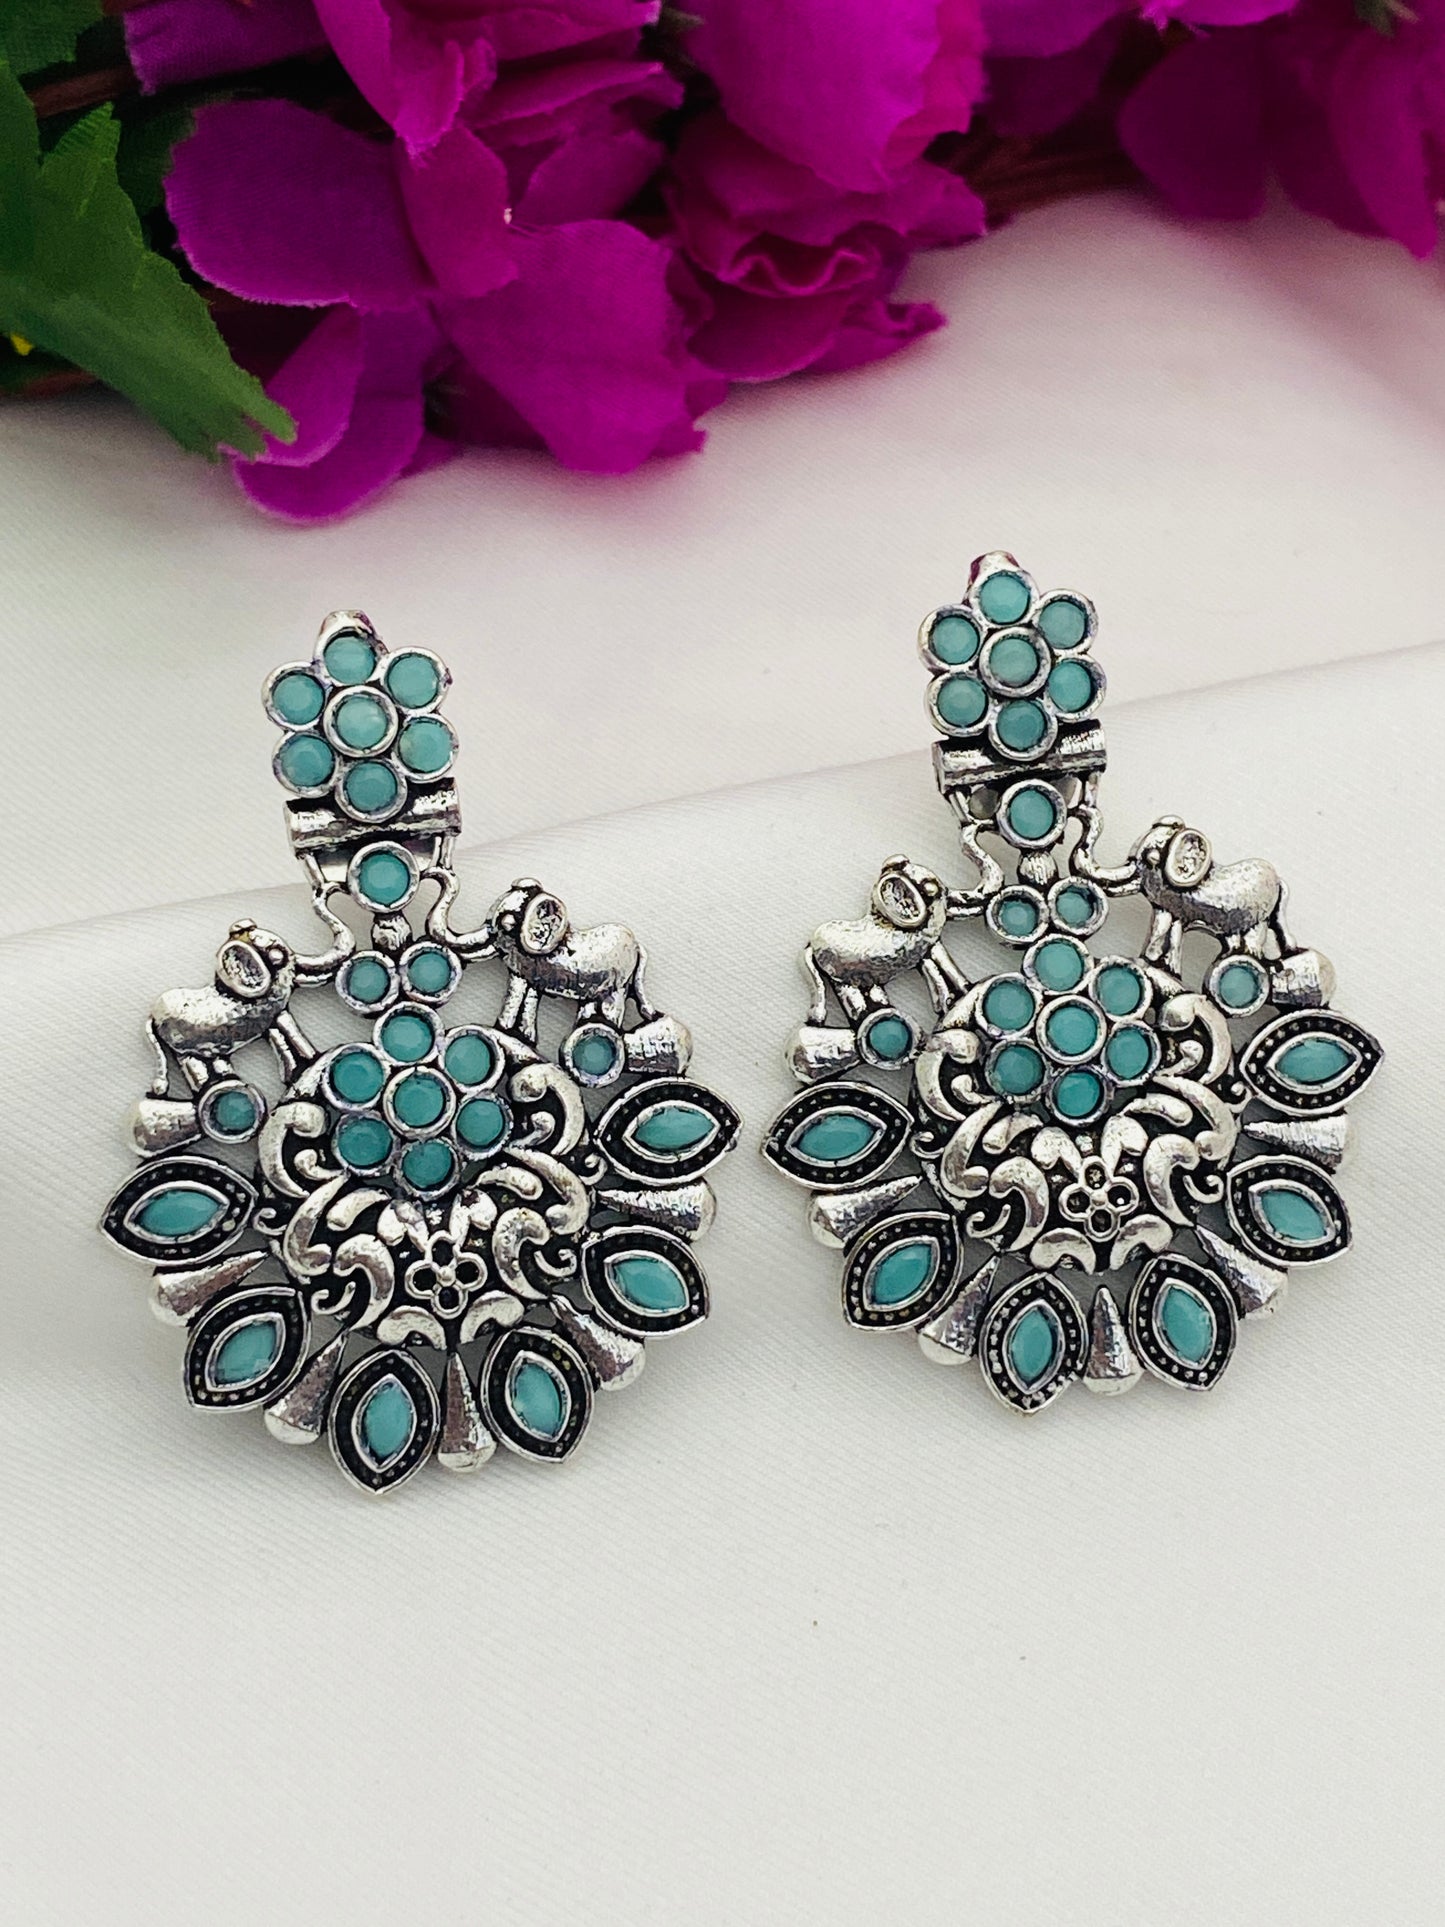 Stylish Skyblue Floral Designer Silver Oxidized Earrings For Women In USA